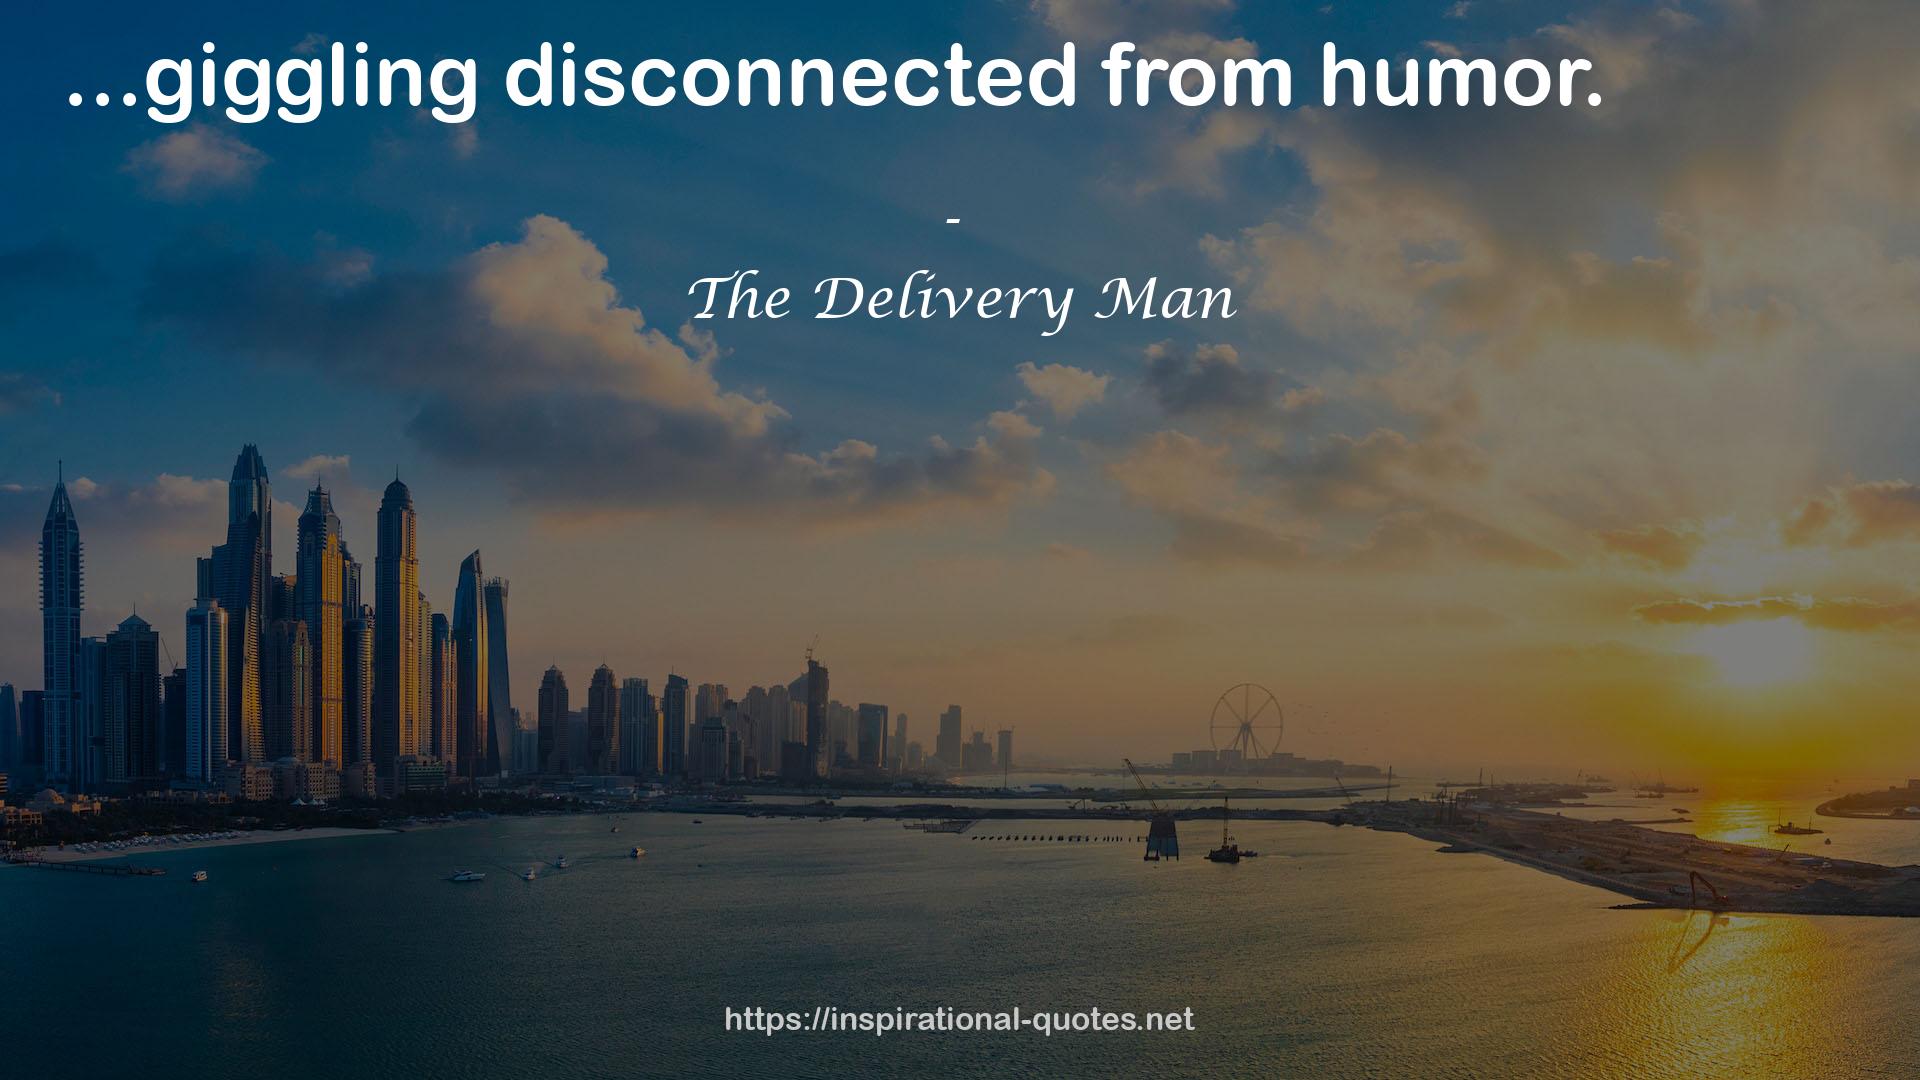 The Delivery Man QUOTES